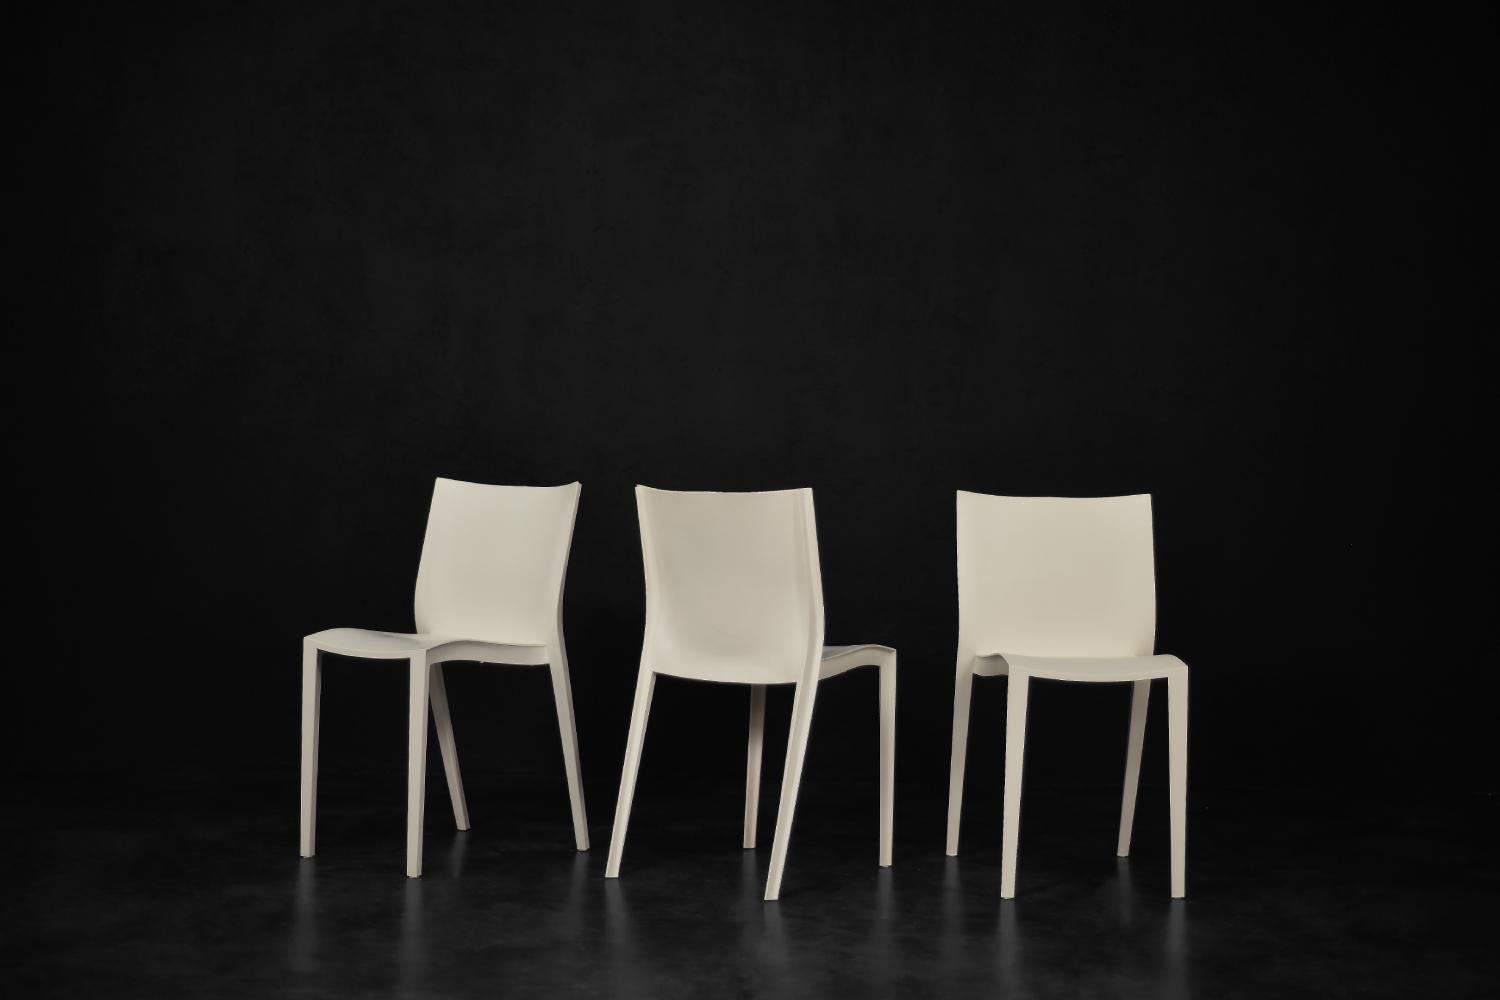 Set of 5 Vintage Midcentury French Modern Slickslick Chairs by Philippe Starck For Sale 6